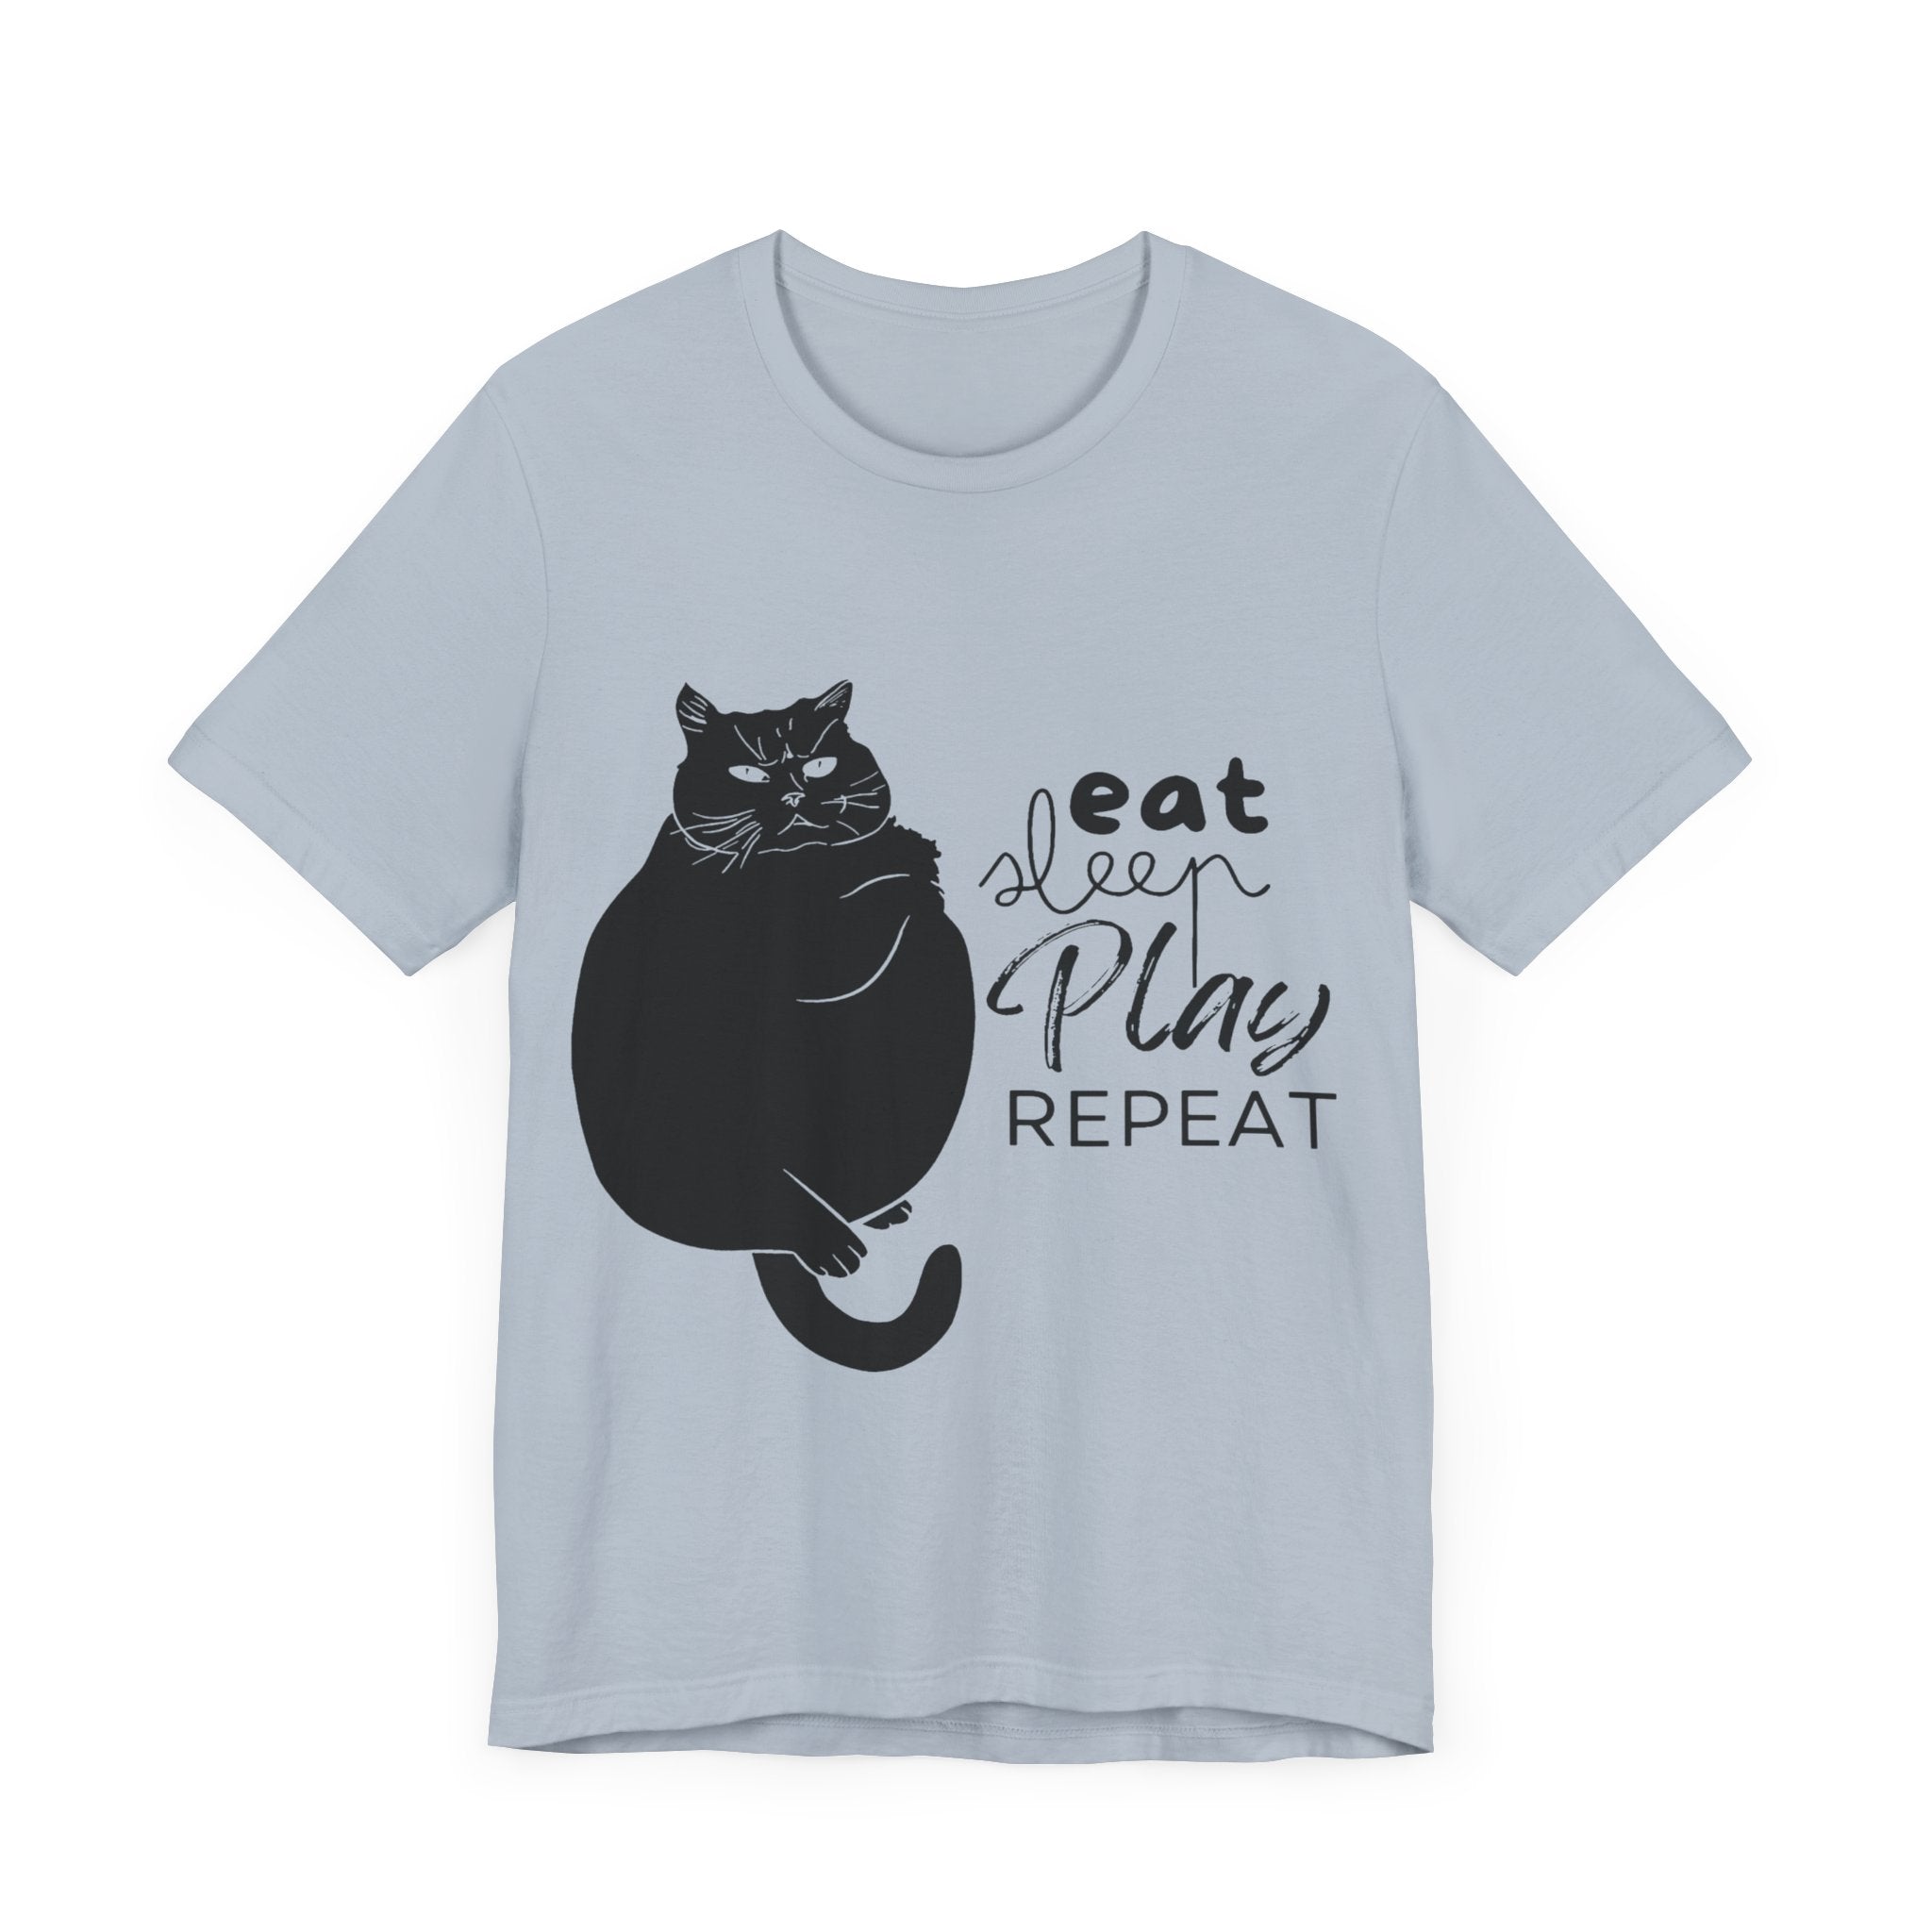 Cat's Daily Mantra - 'Eat Sleep Play Repeat' Casual T-Shirt  Unisex Jersey Short Sleeve Tee